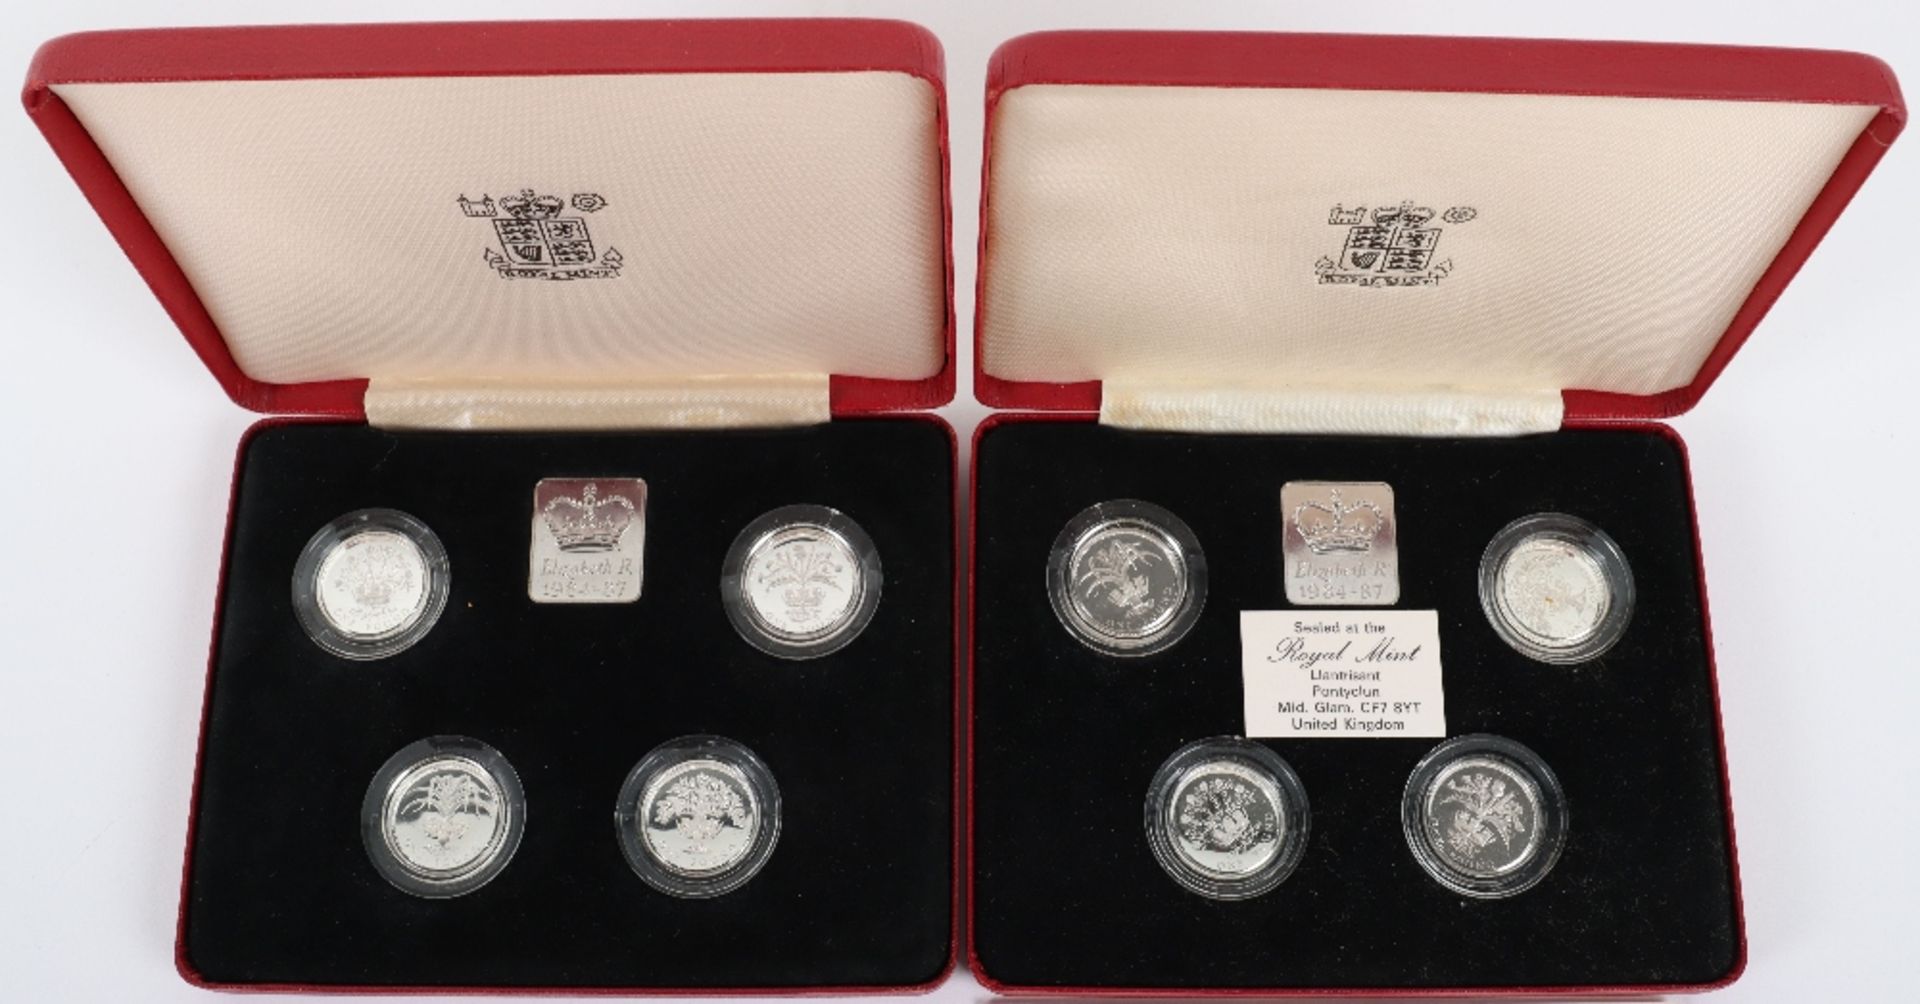 Two 1984-1987 Silver Proof One Pound Collection - Image 2 of 3